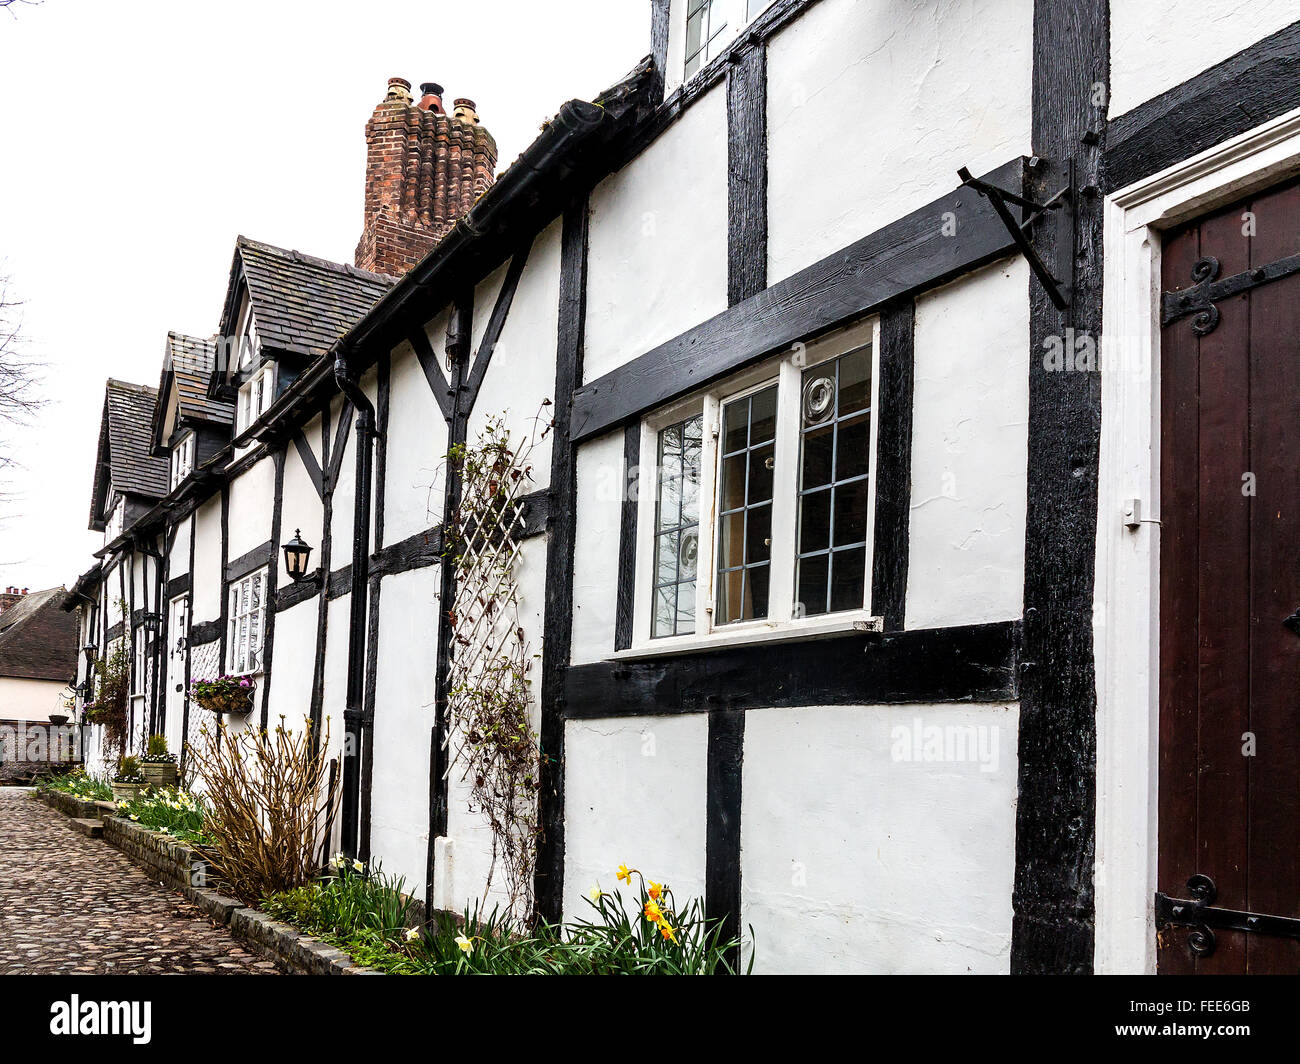 Rural timber framed cottages in Great Budworth, Cheshire, England, UK Stock Photo